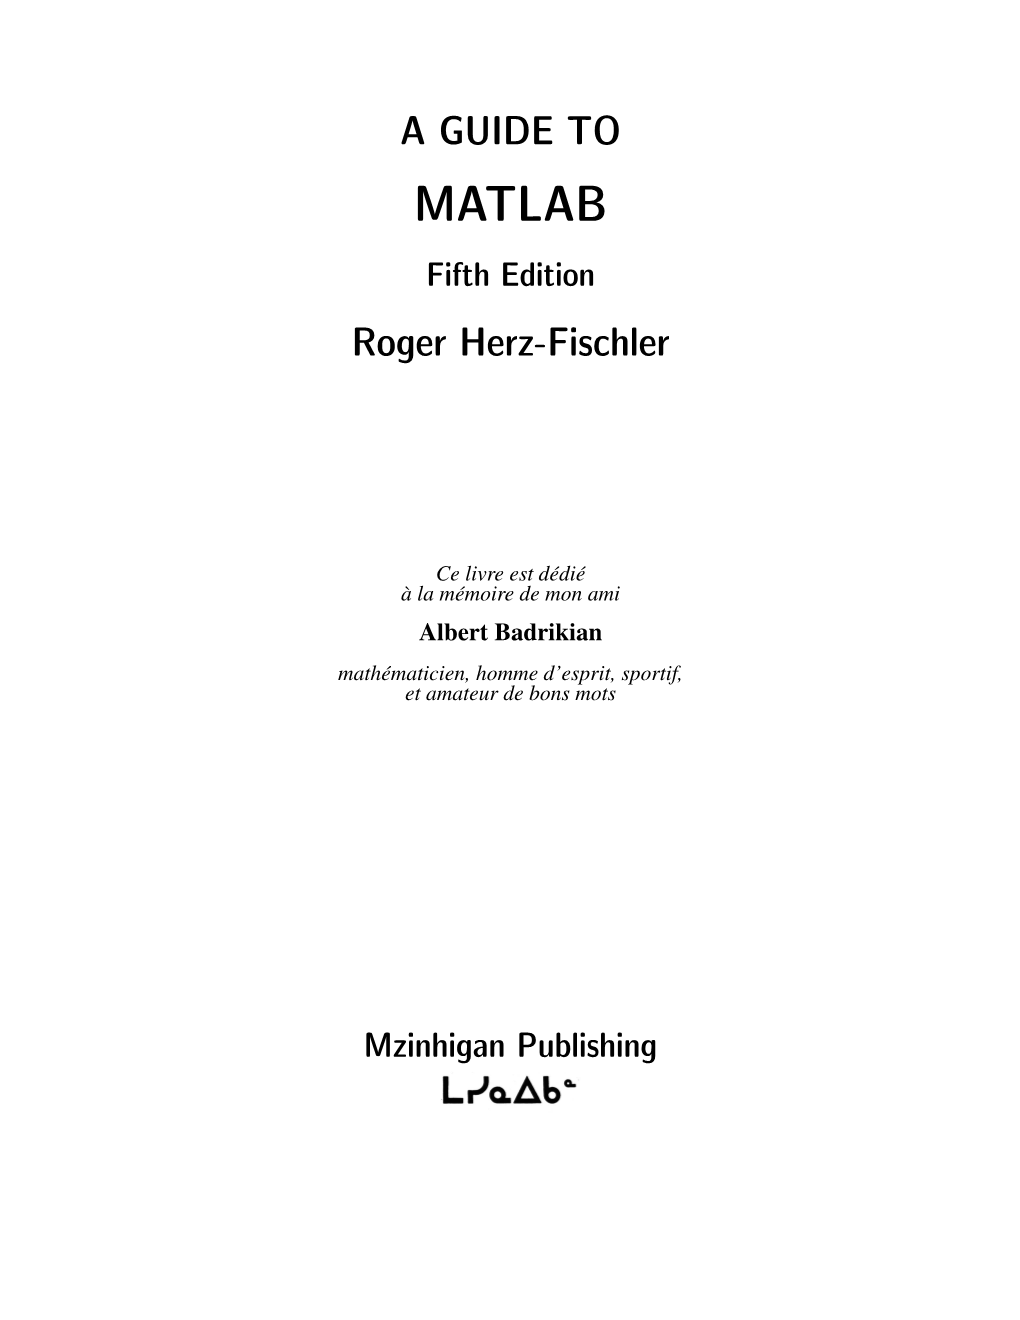 A GUIDE to MATLAB Fifth Edition Roger Herz-Fischler